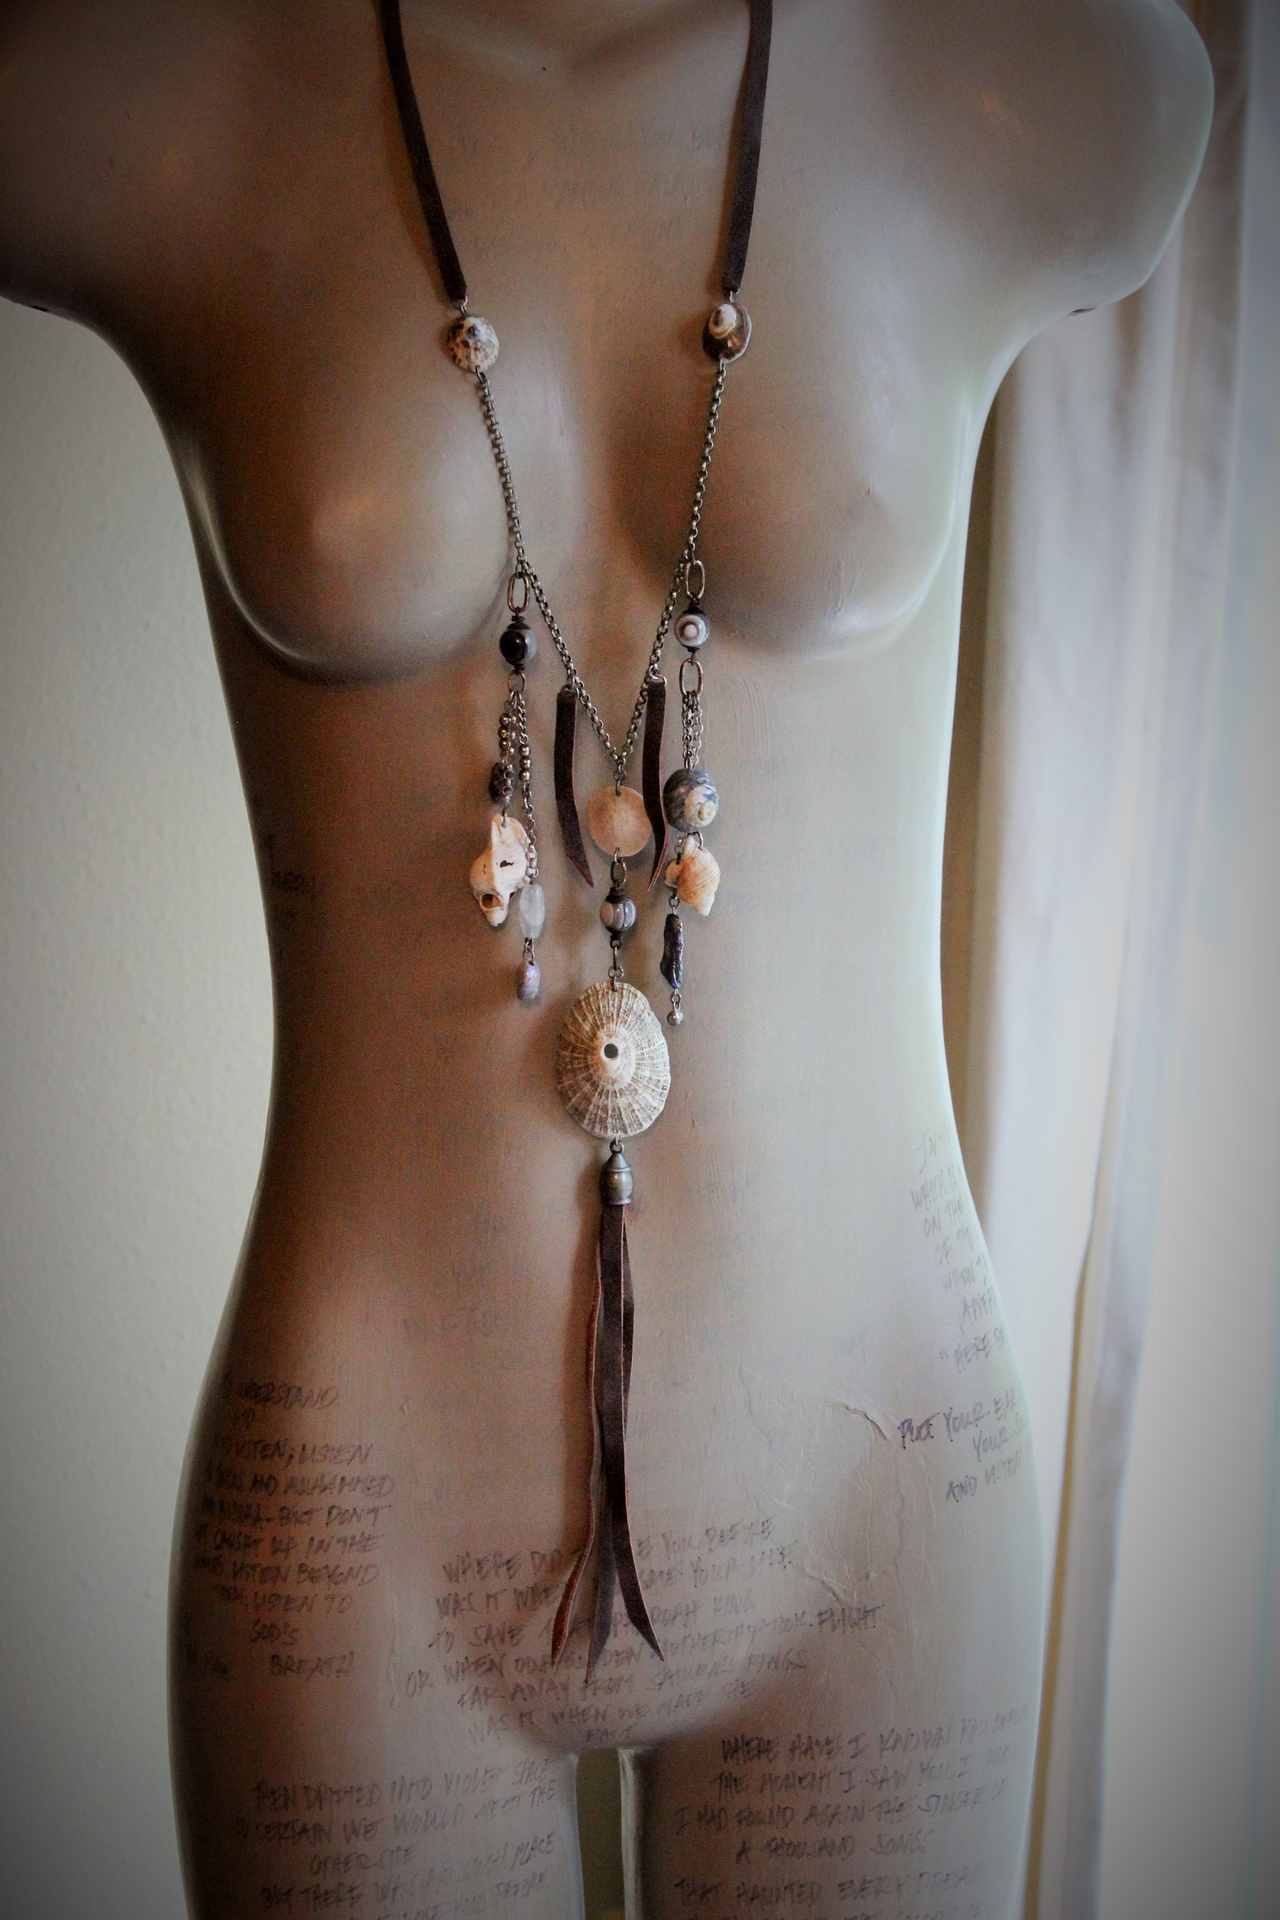 Gifts from the Sea Necklace w/Distressed Leather,Sterling Chain,Found Shells,Banded Agate,Distressed Leather Tassel